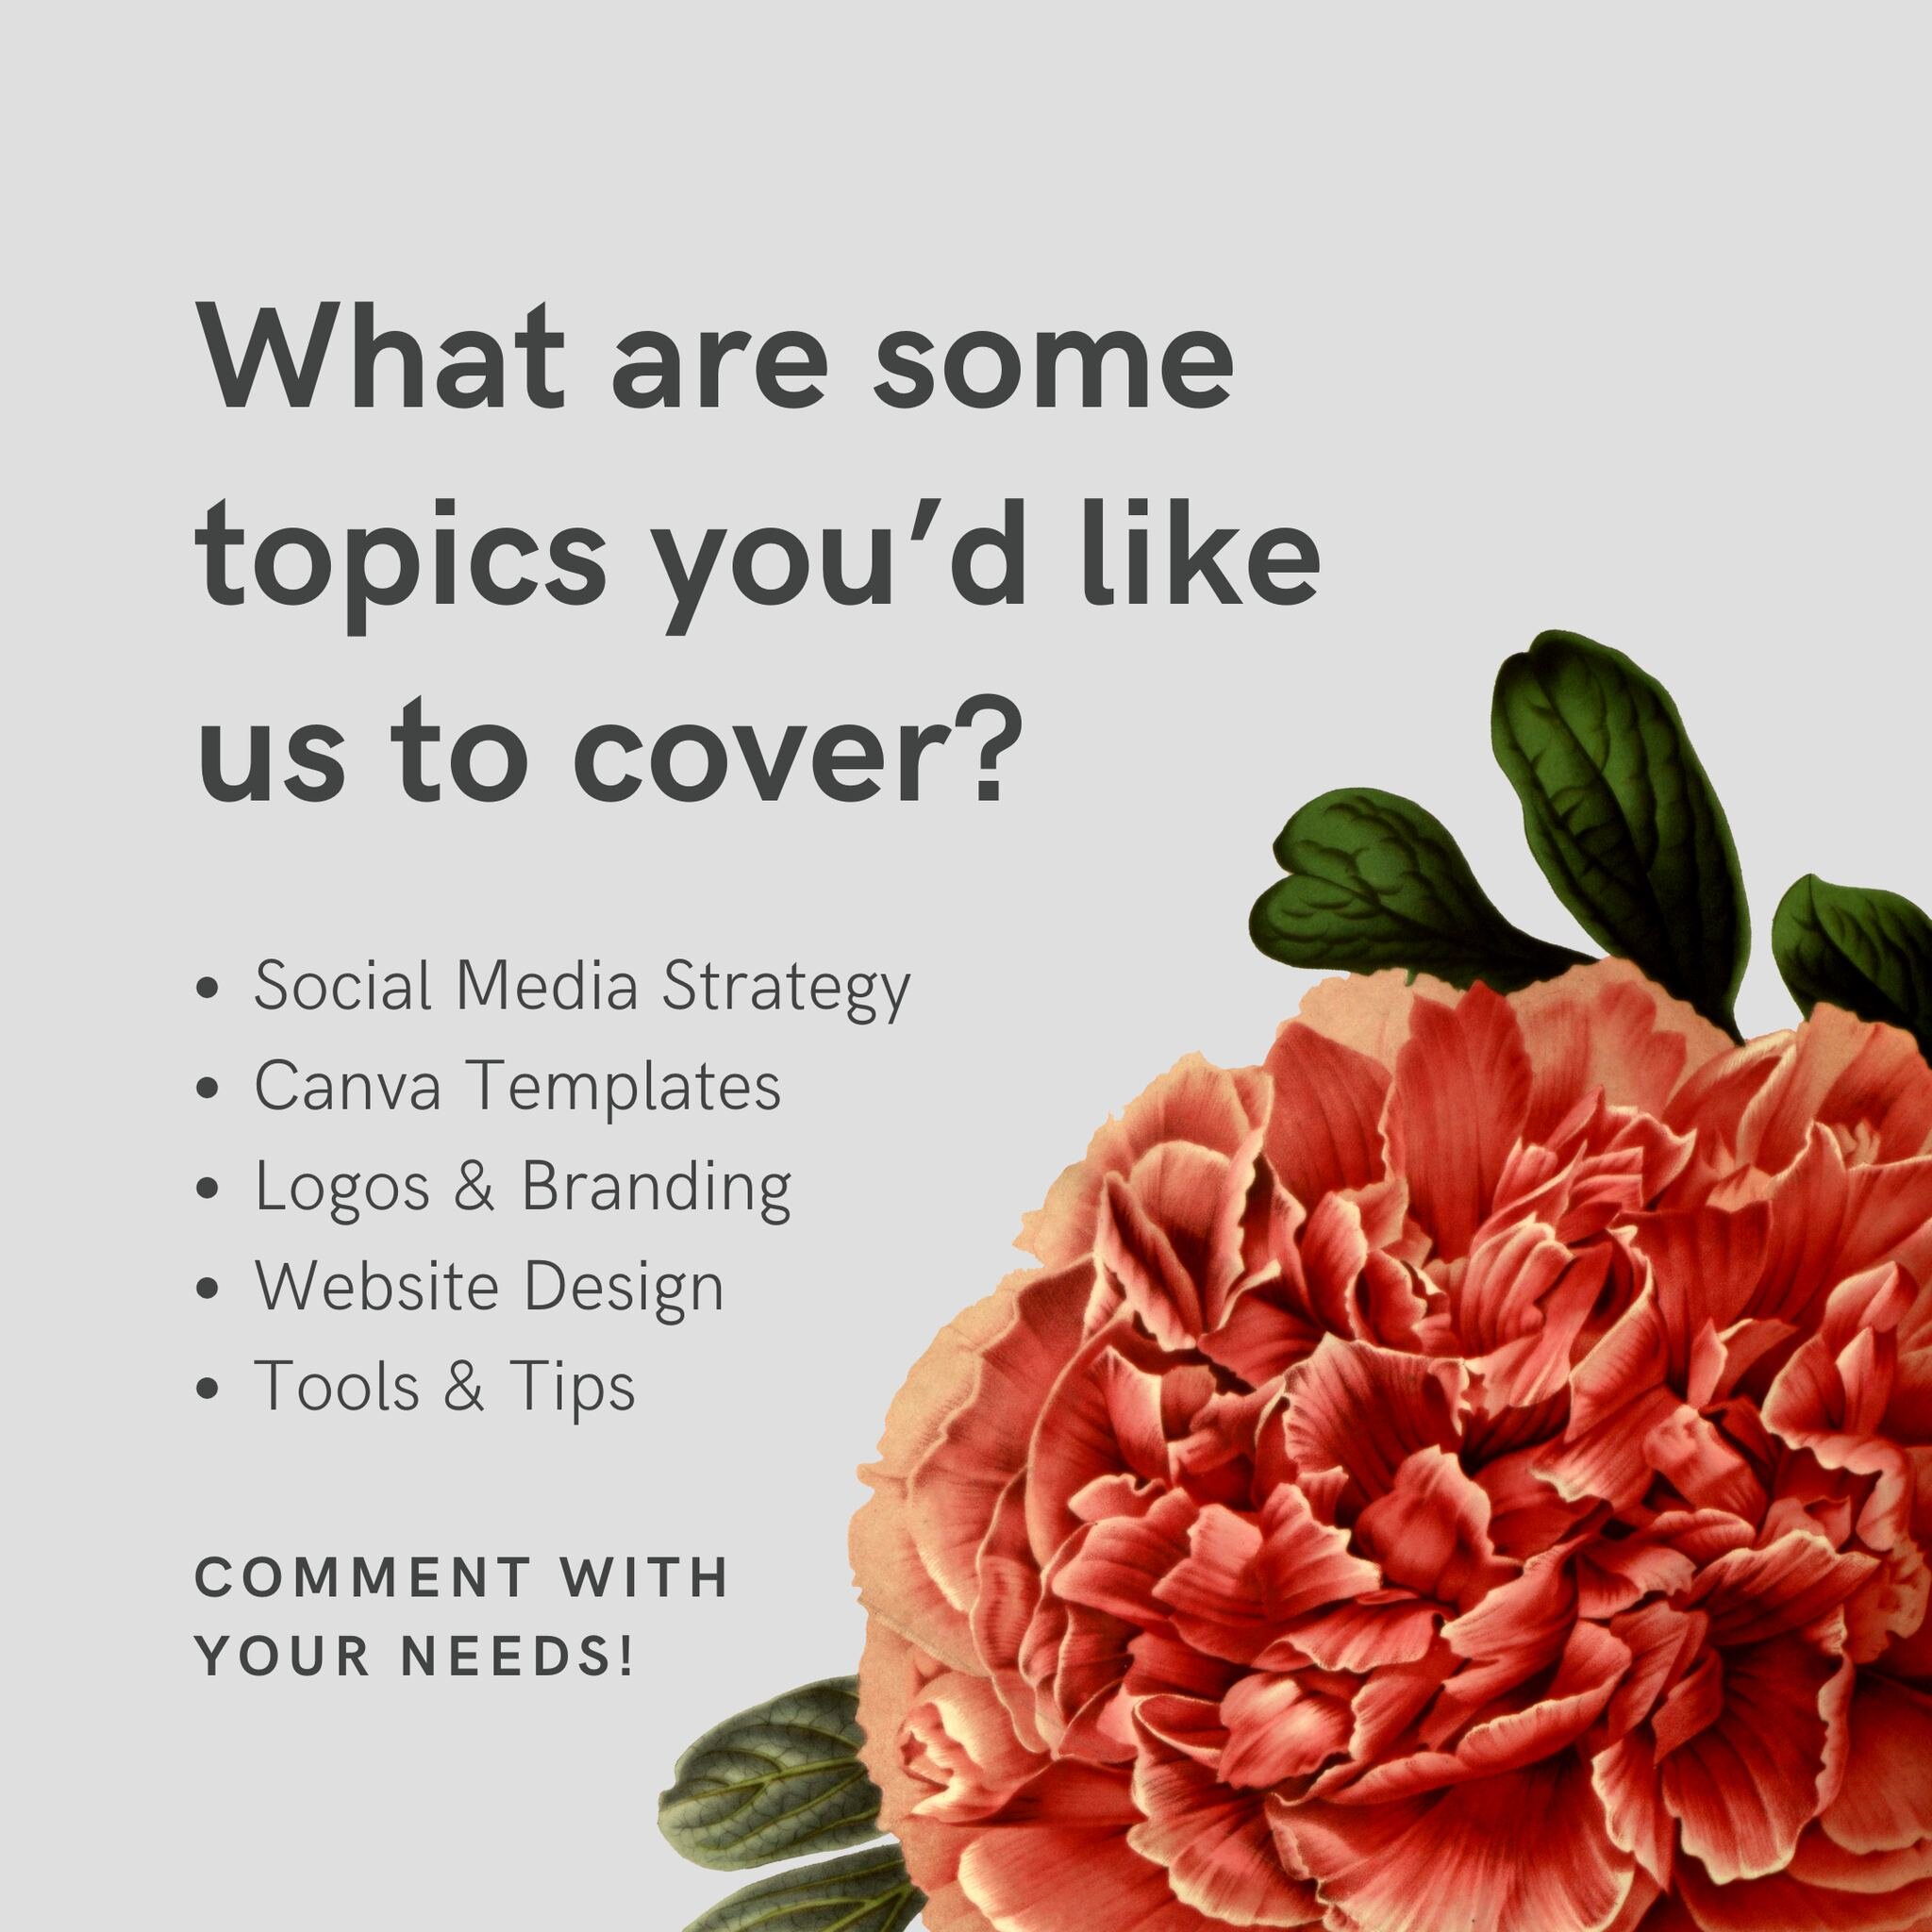 We're curious to hear from you: What design-related content do you want to see more of on our feed? Comment with things that relate to your specific needs or questions you might have. Your feedback is invaluable! 🌟